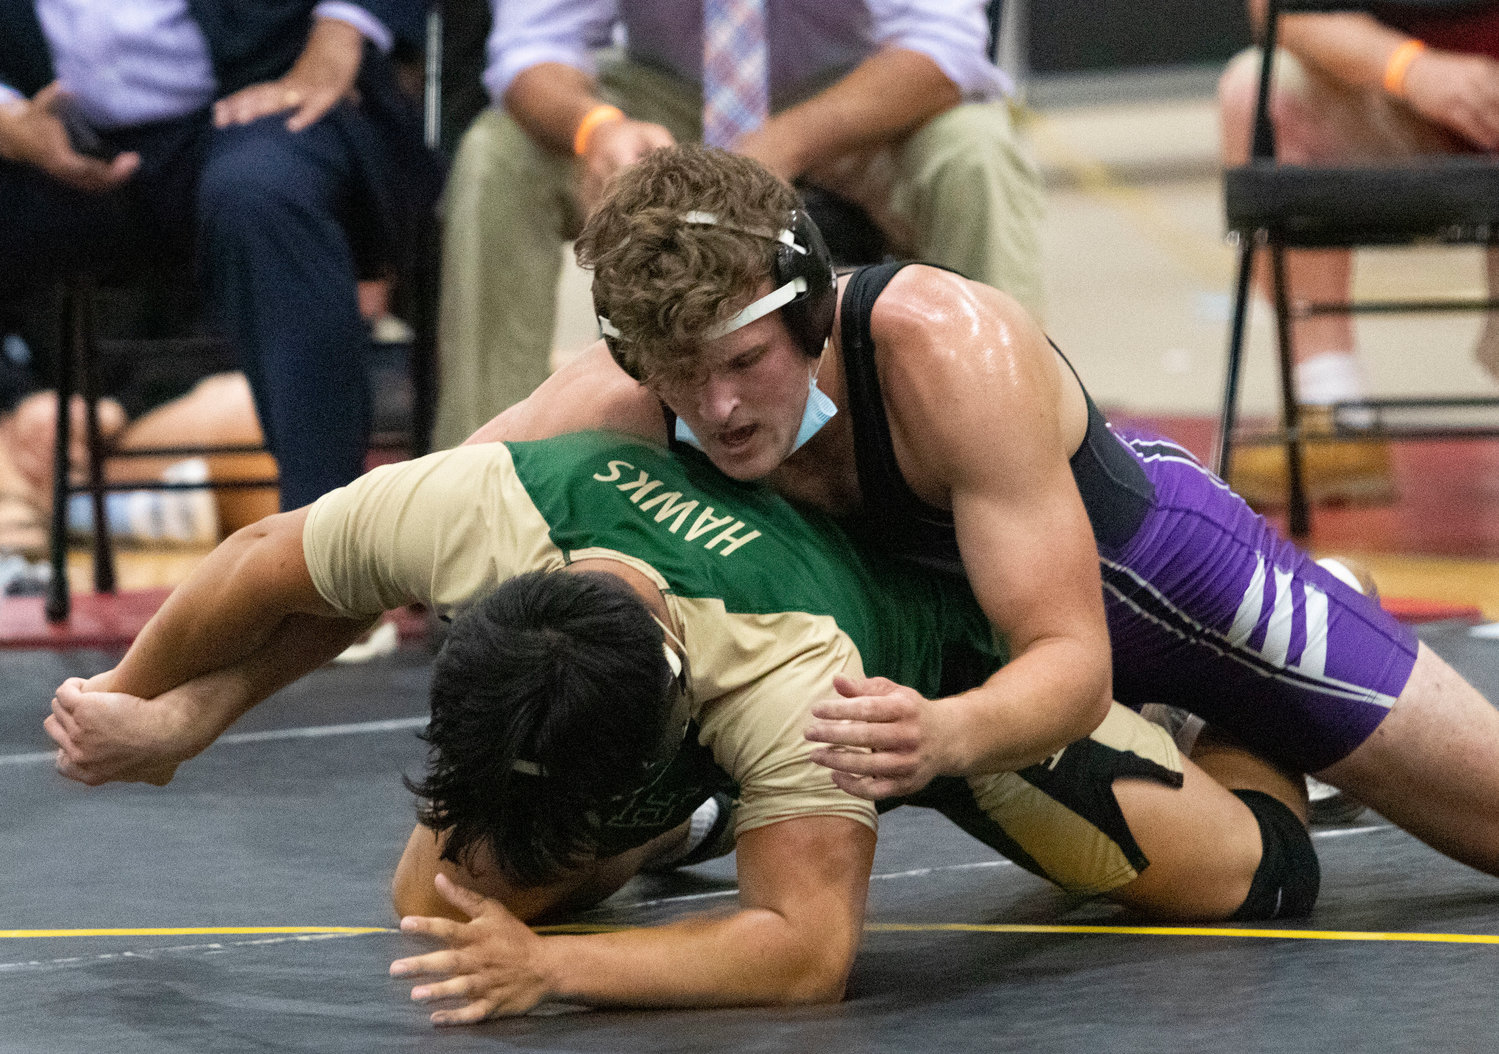 Cory Grifka takes down his opponent, Nathan Reid, during the 182 pound final bout.